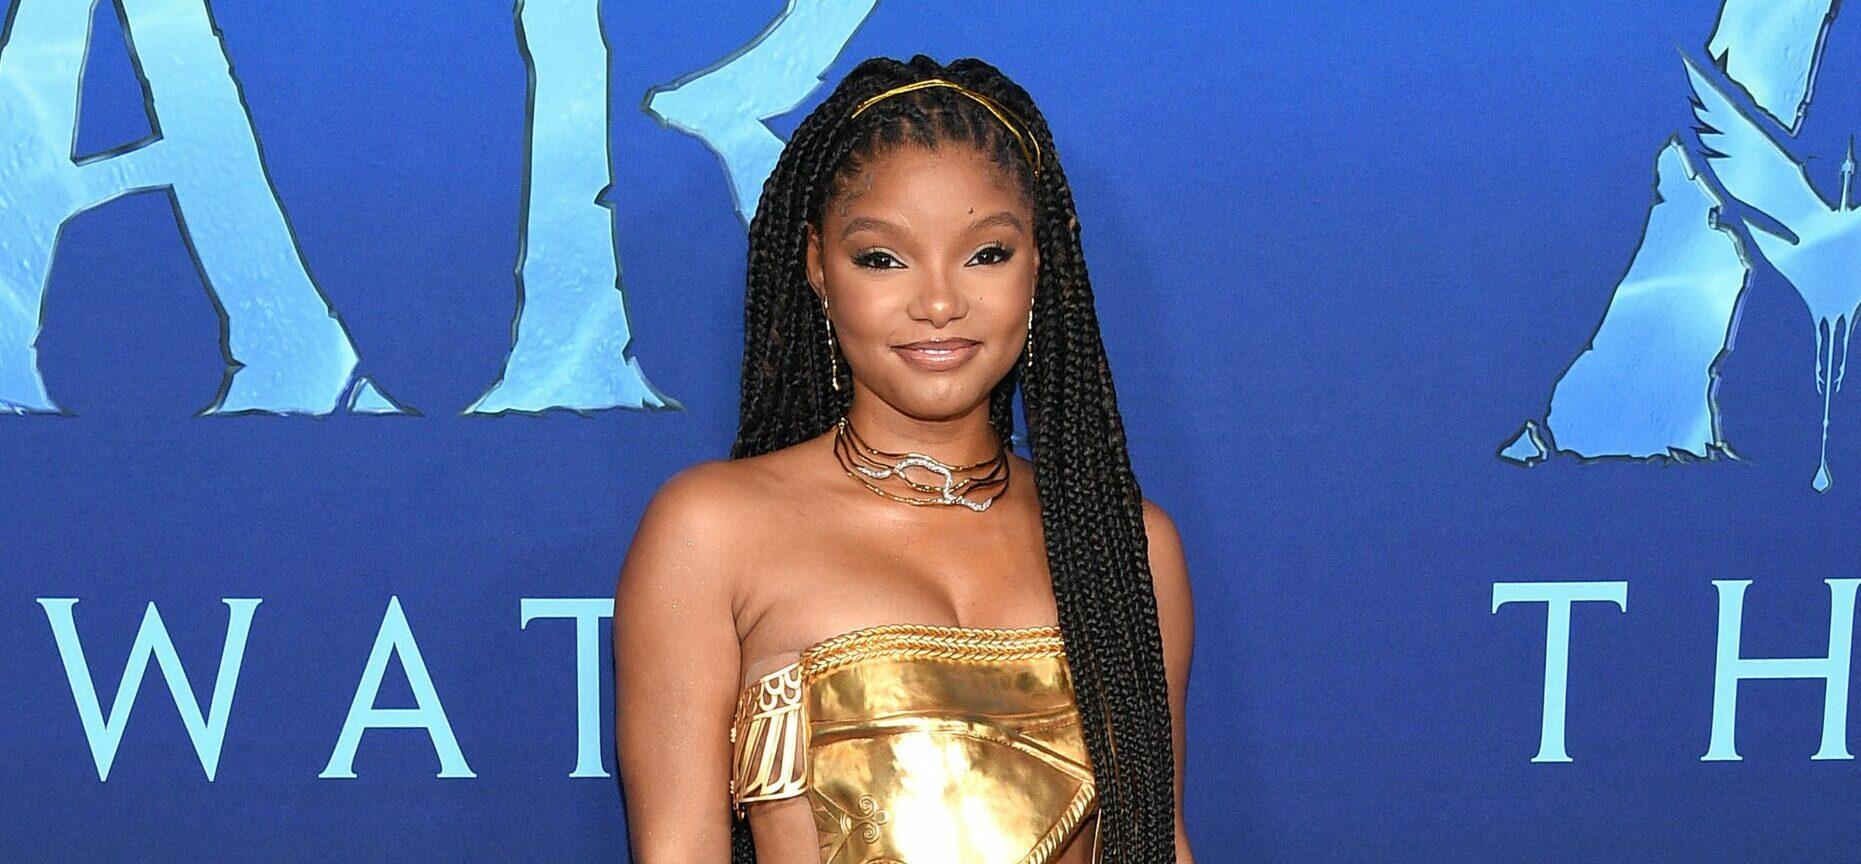 Halle Bailey Avatar: The Way of Water Premiere